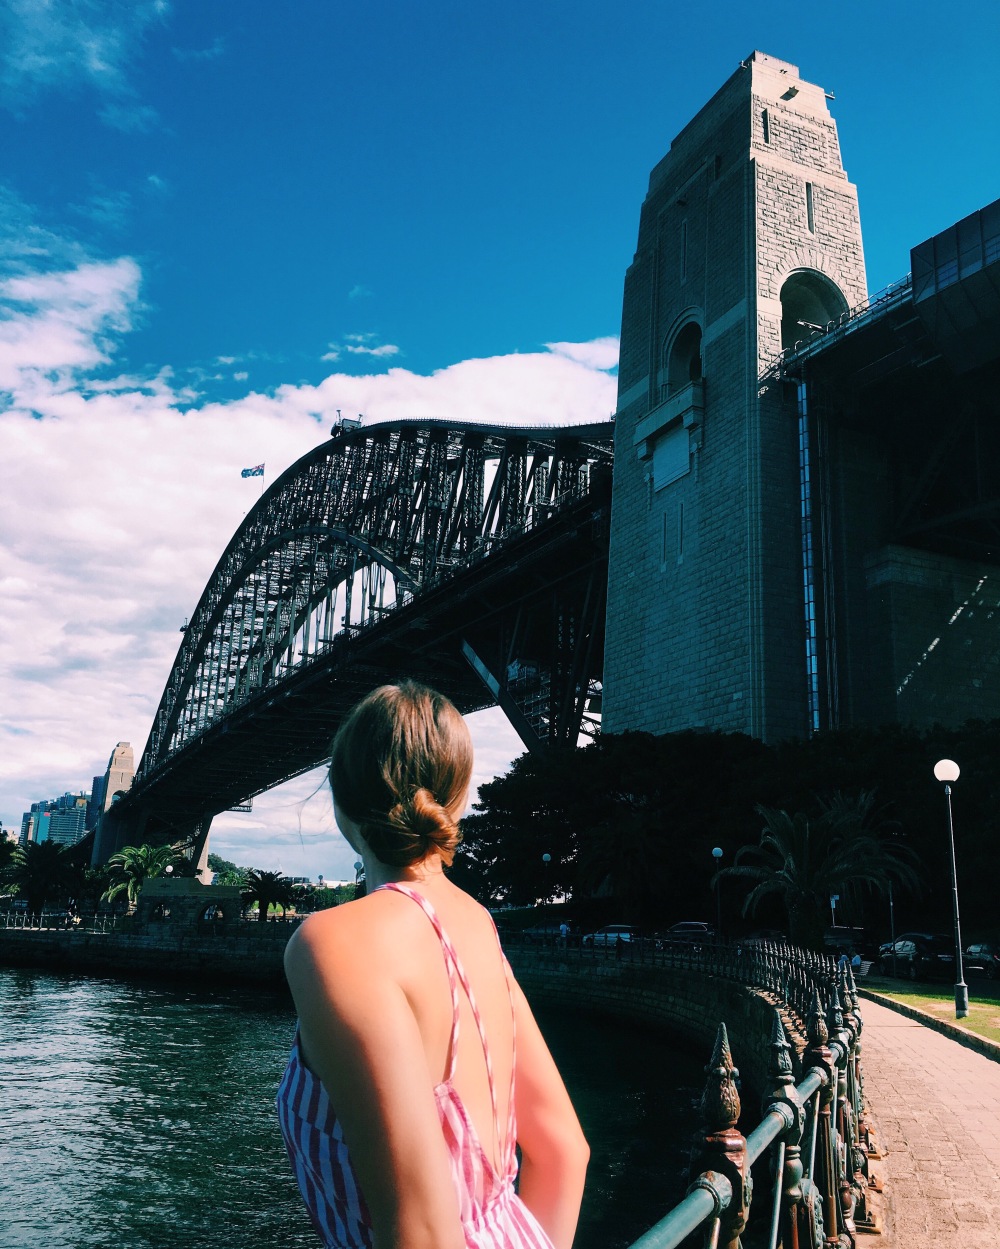 Young woman looks up at the huge Sydney Harbour Bridge